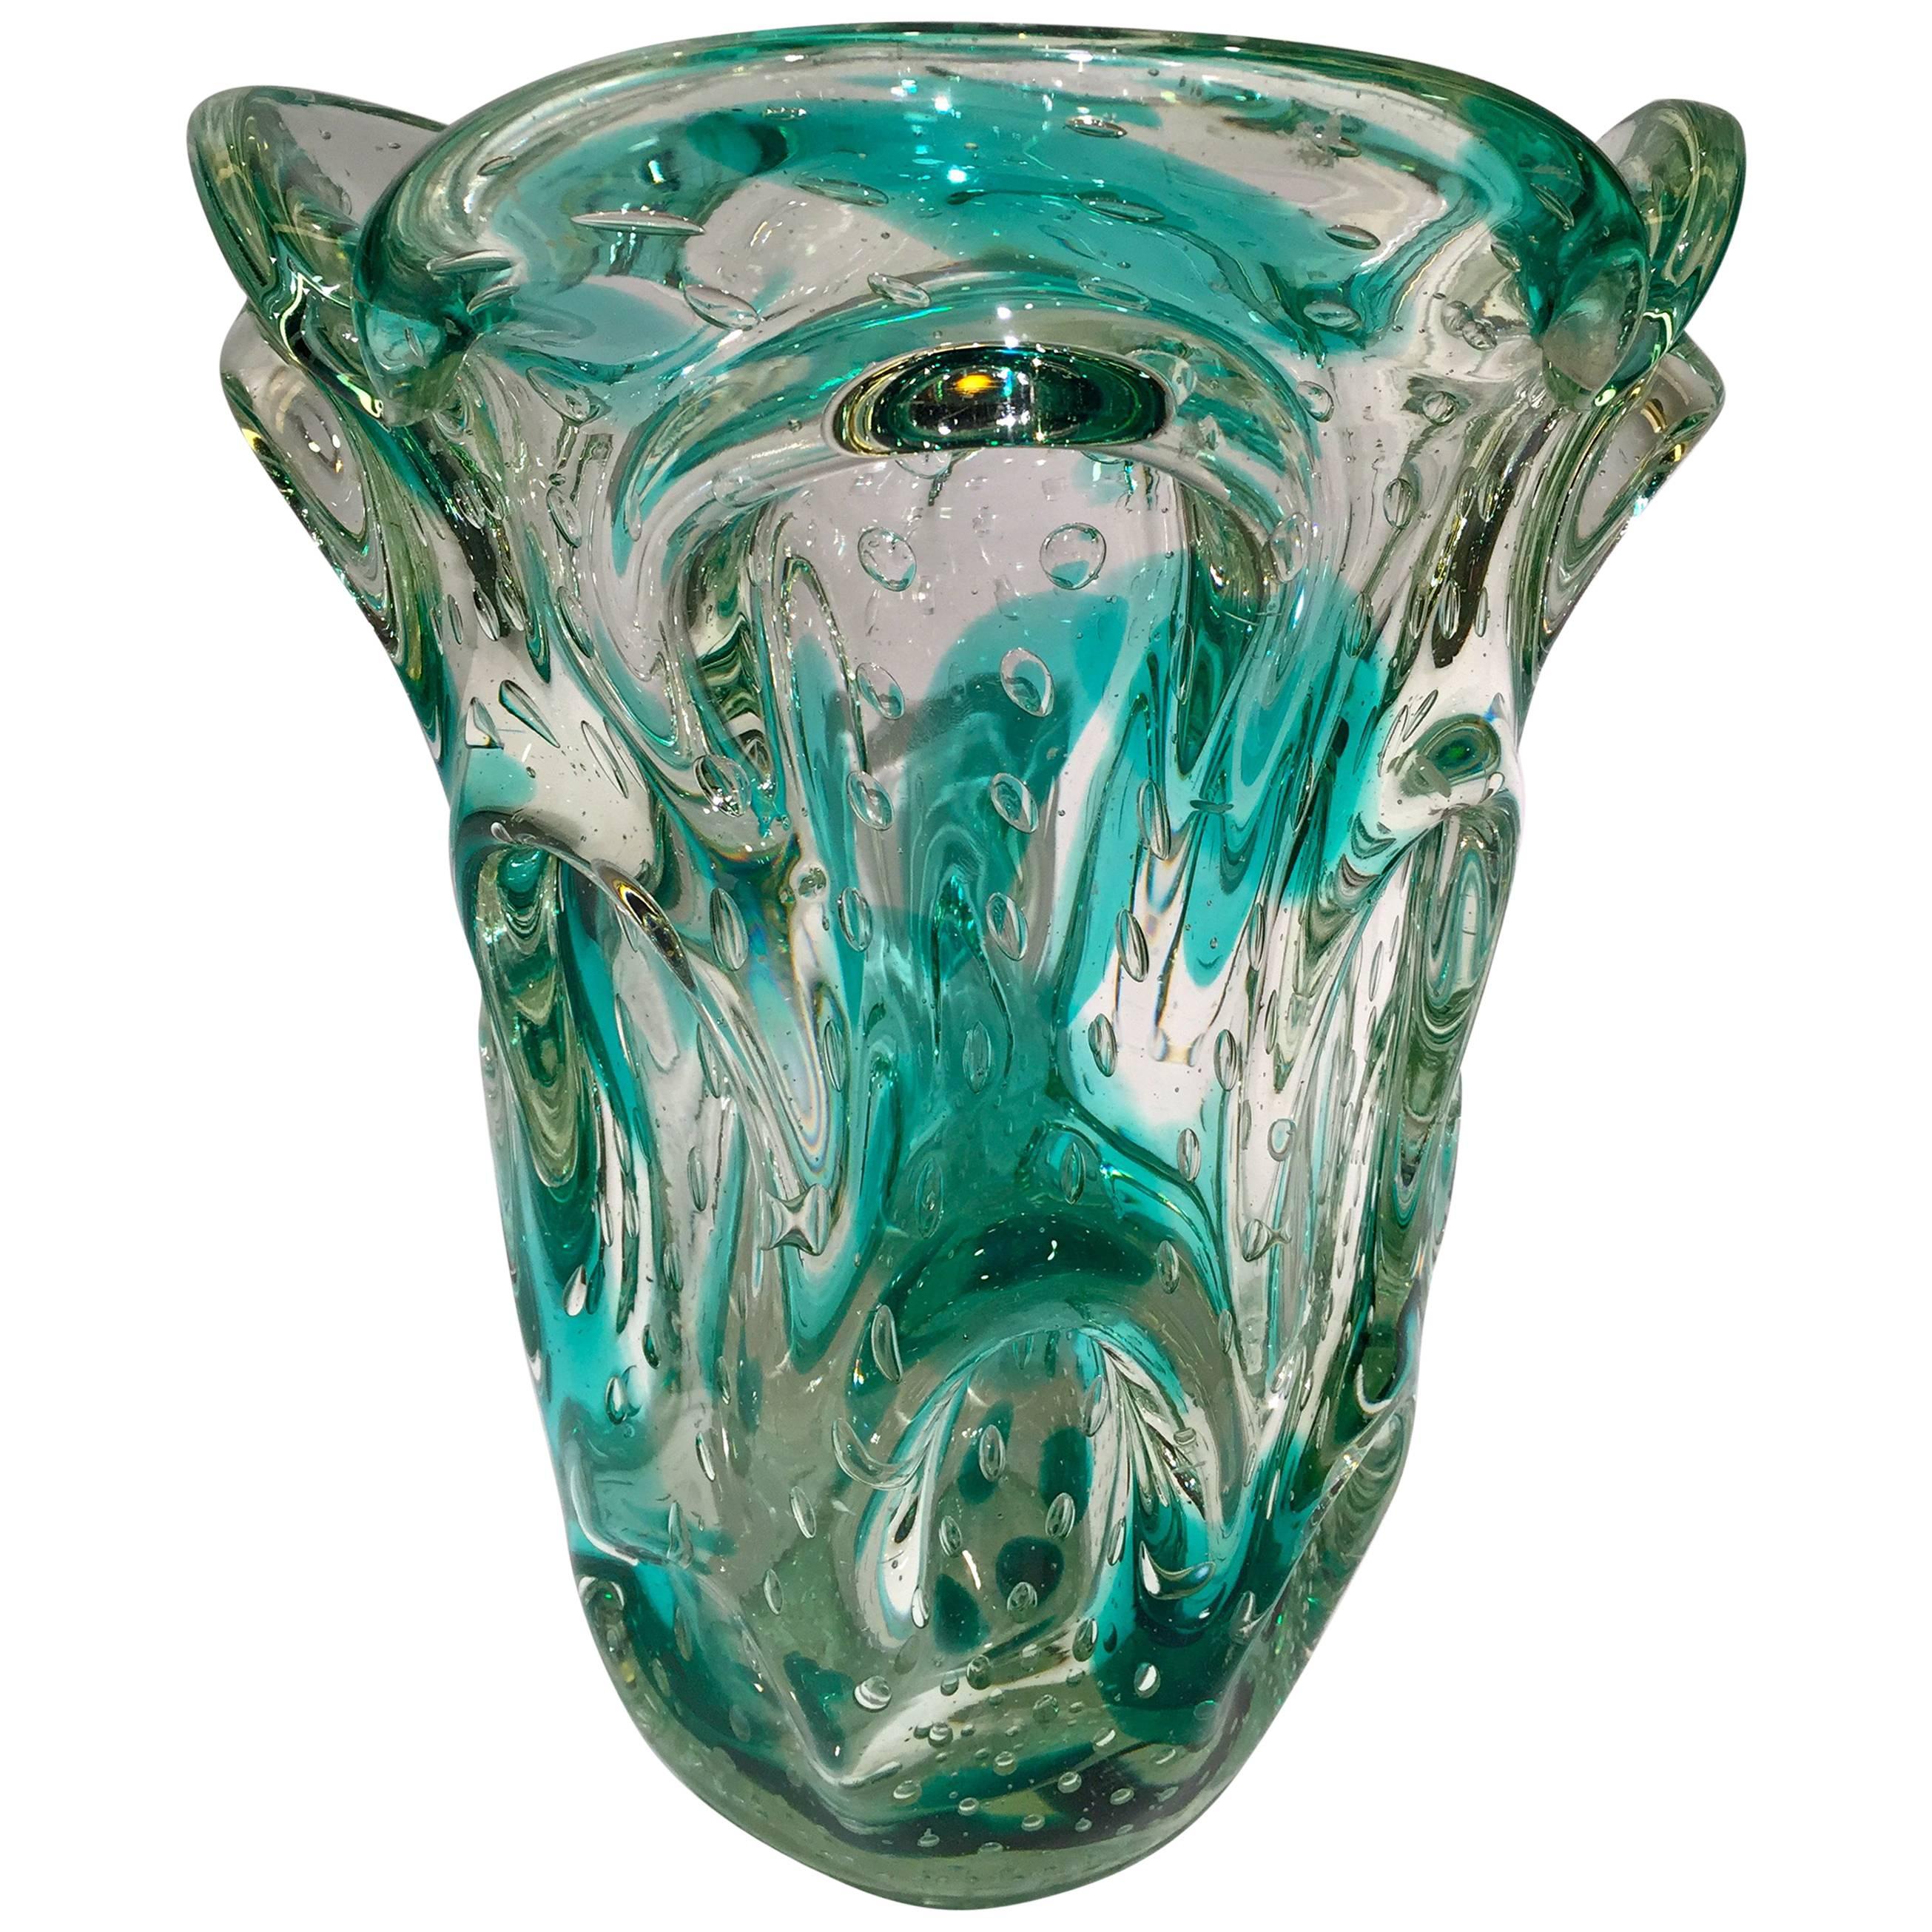 Murano Artistic Blown Glass "Cactus" Vase Green and Crystal, circa 1950 For Sale